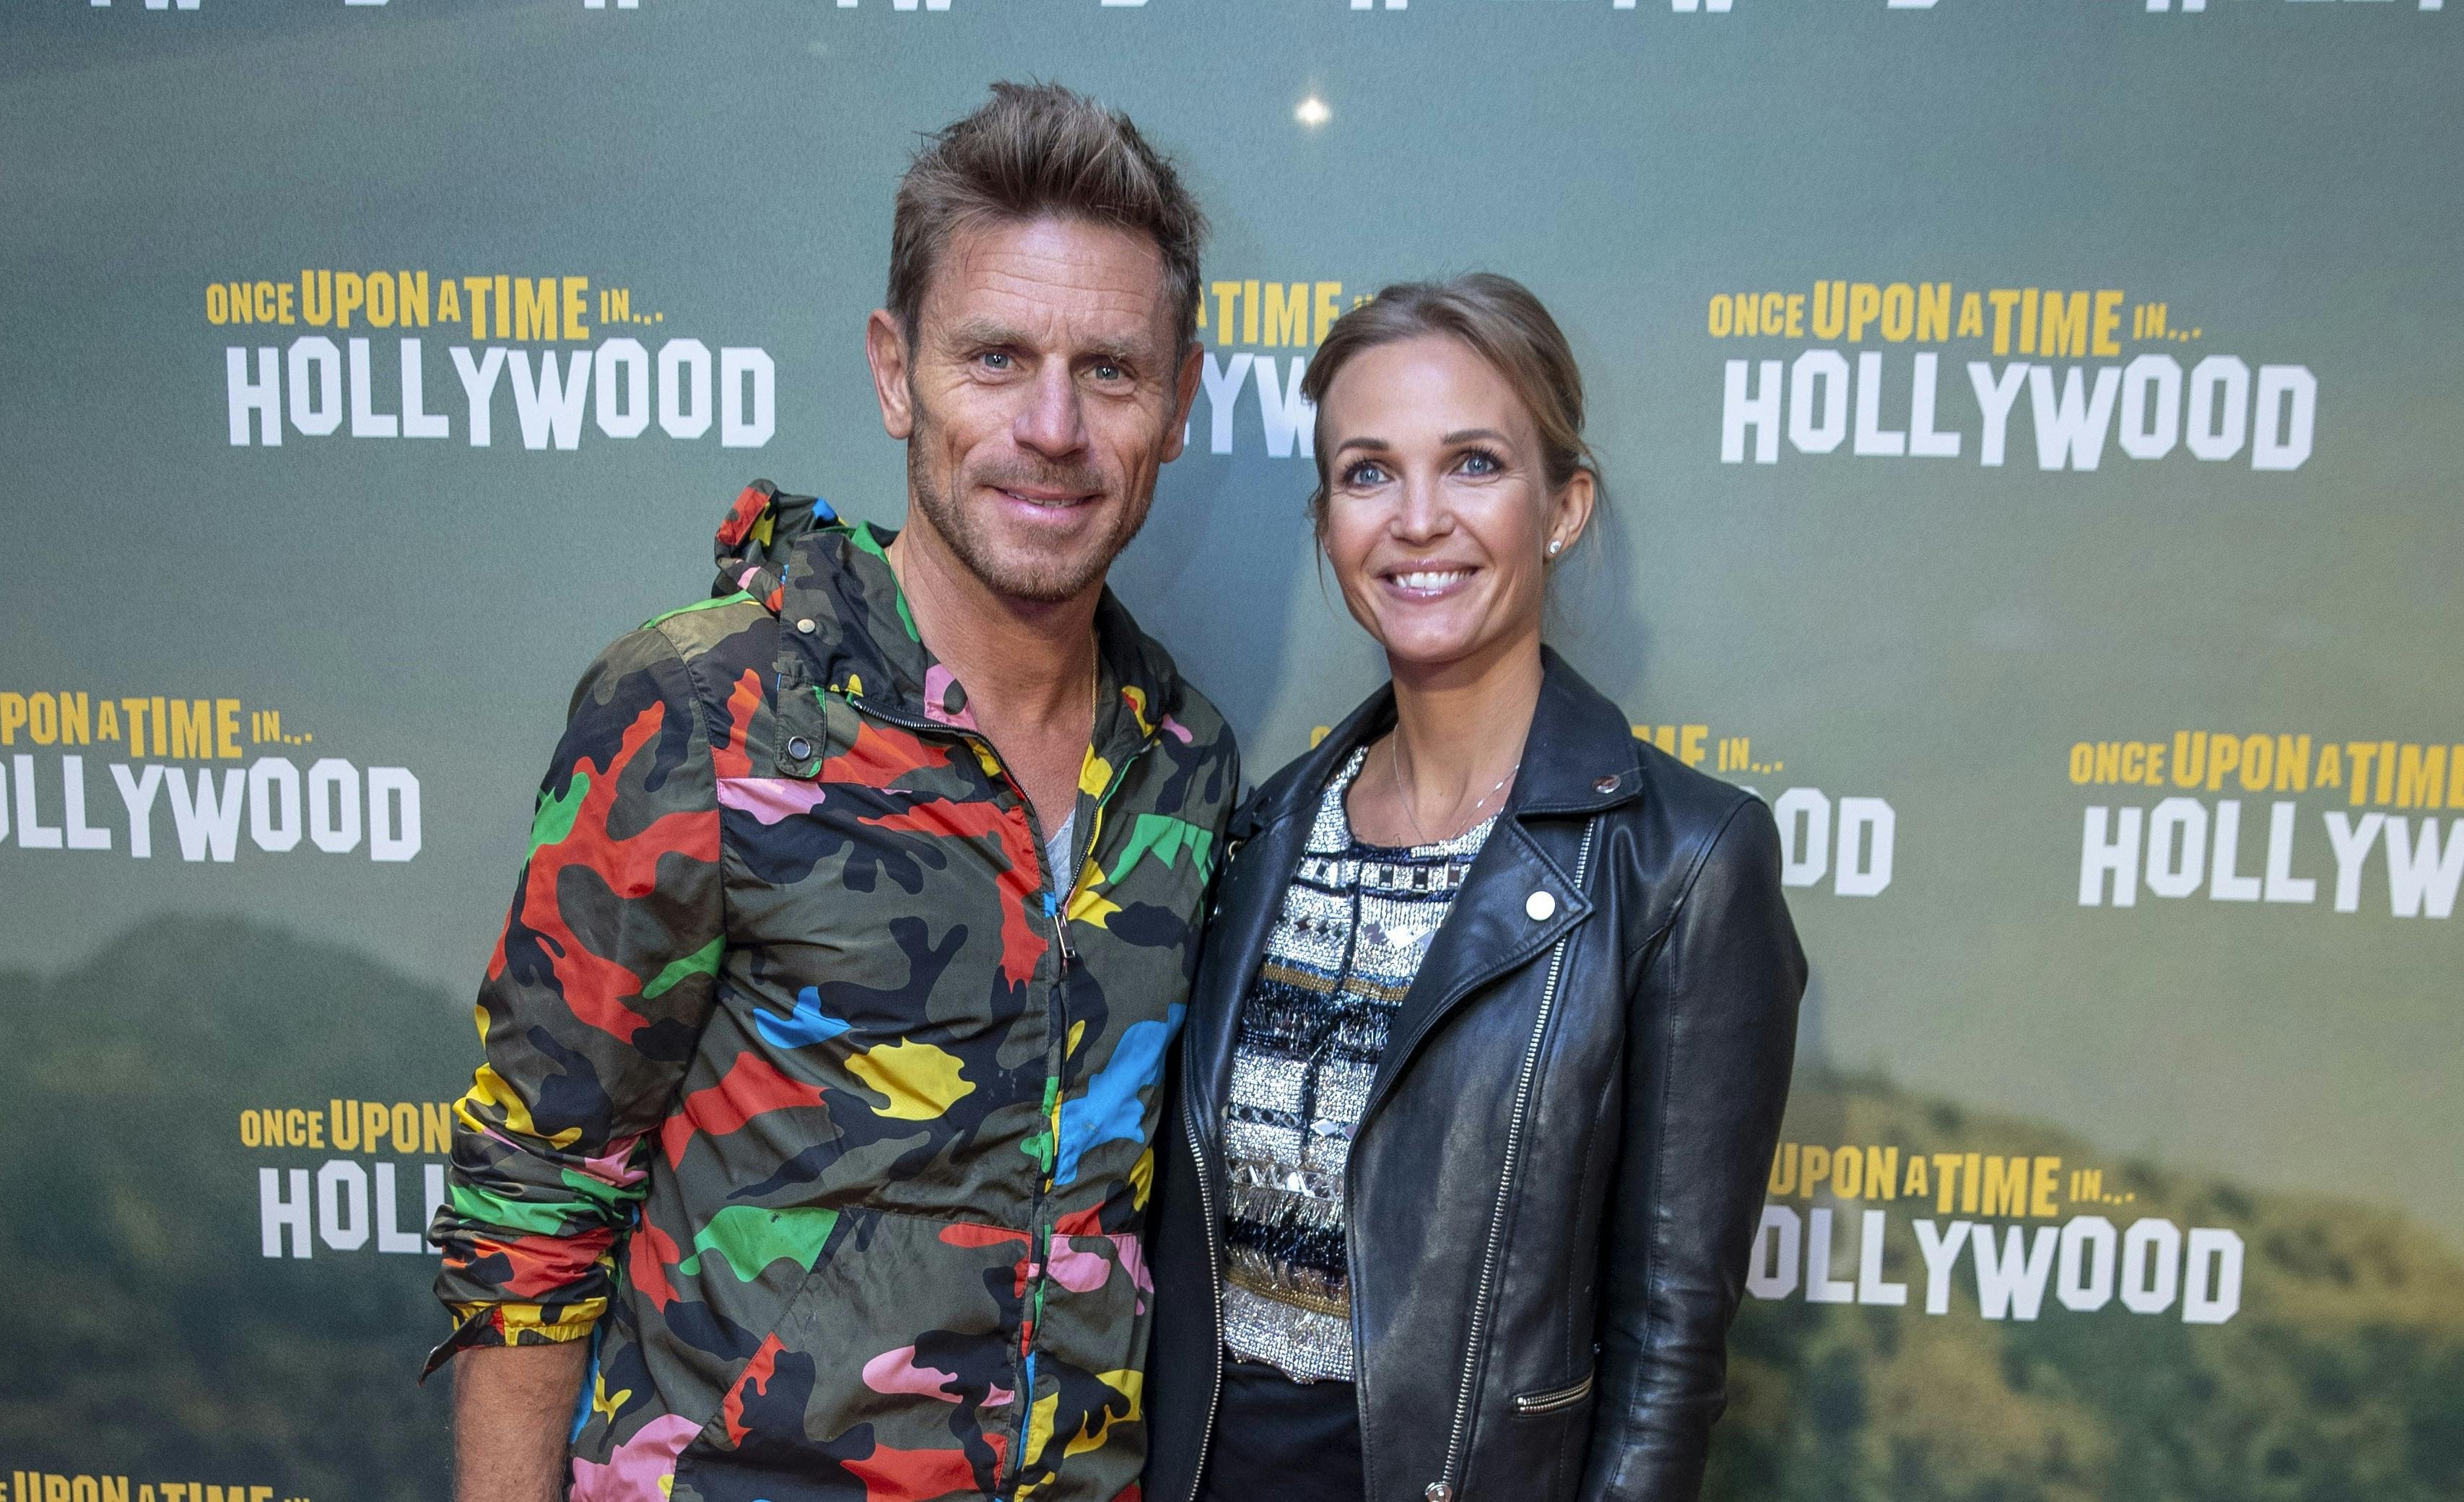 https://imgix.seoghoer.dk/media/article/20190813_dm_once_upon_a_time_in_hollywood_012_0.jpeg